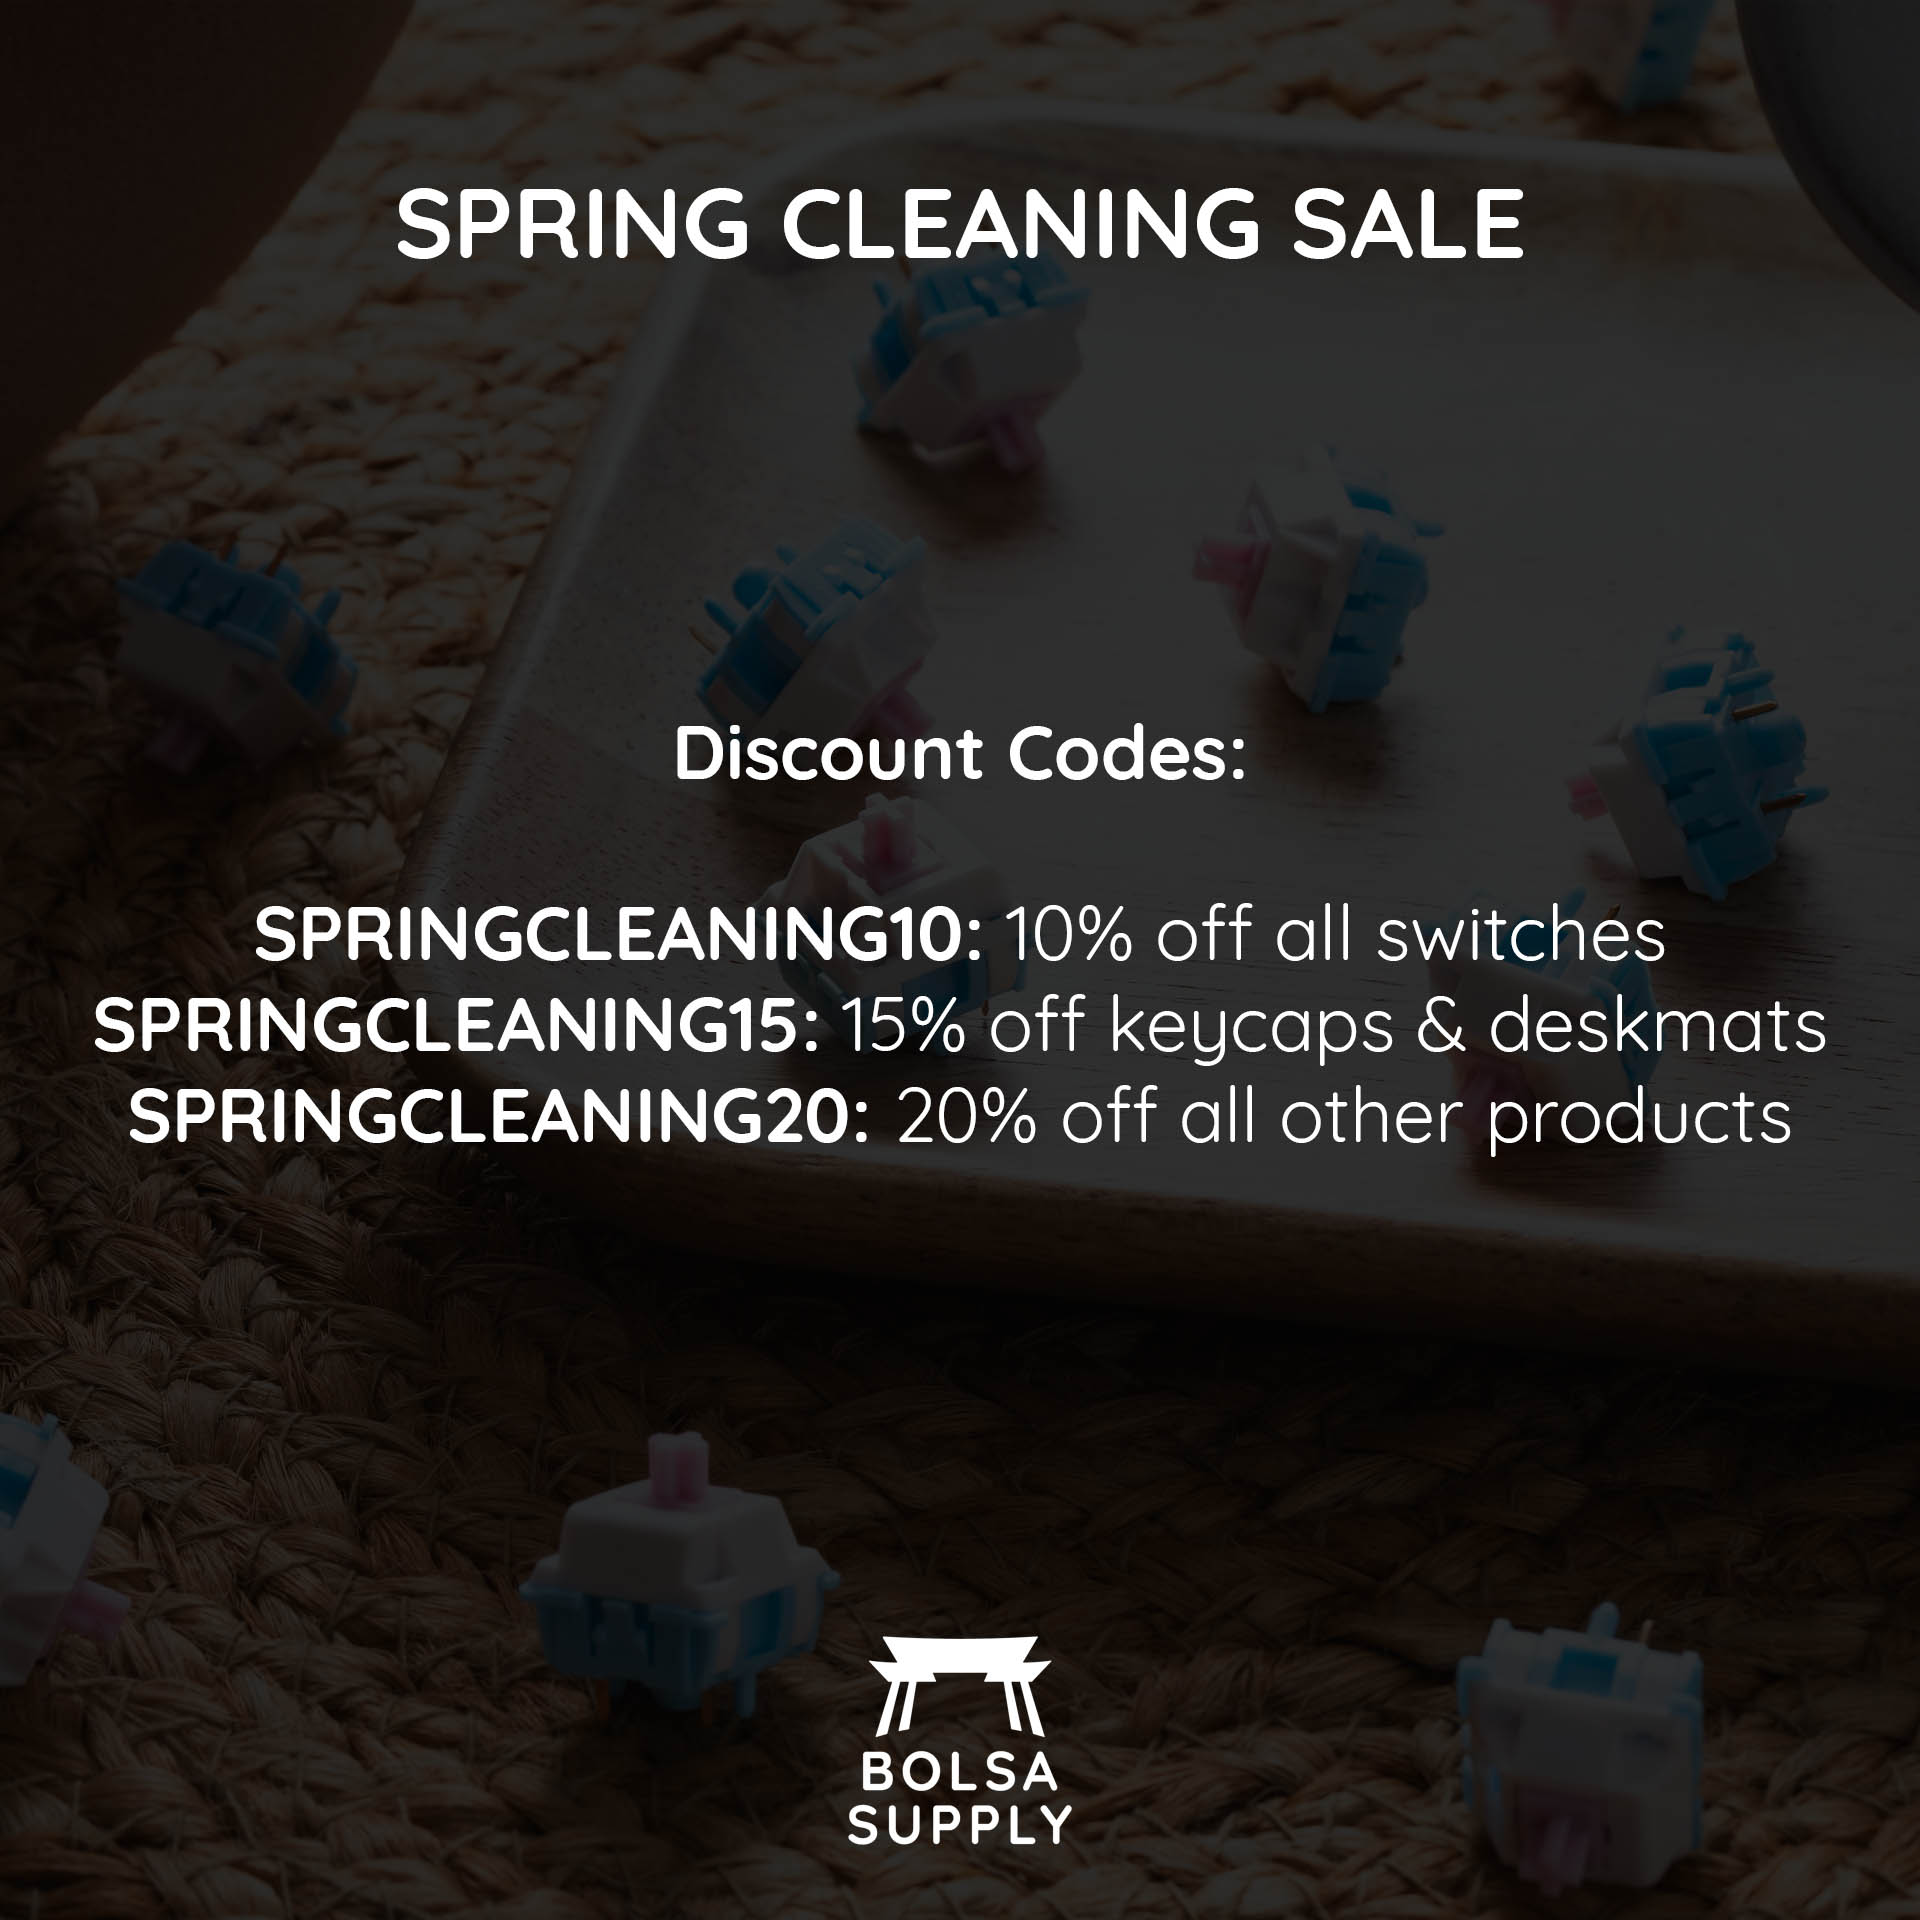 Spring Cleaning Sales Event Live!